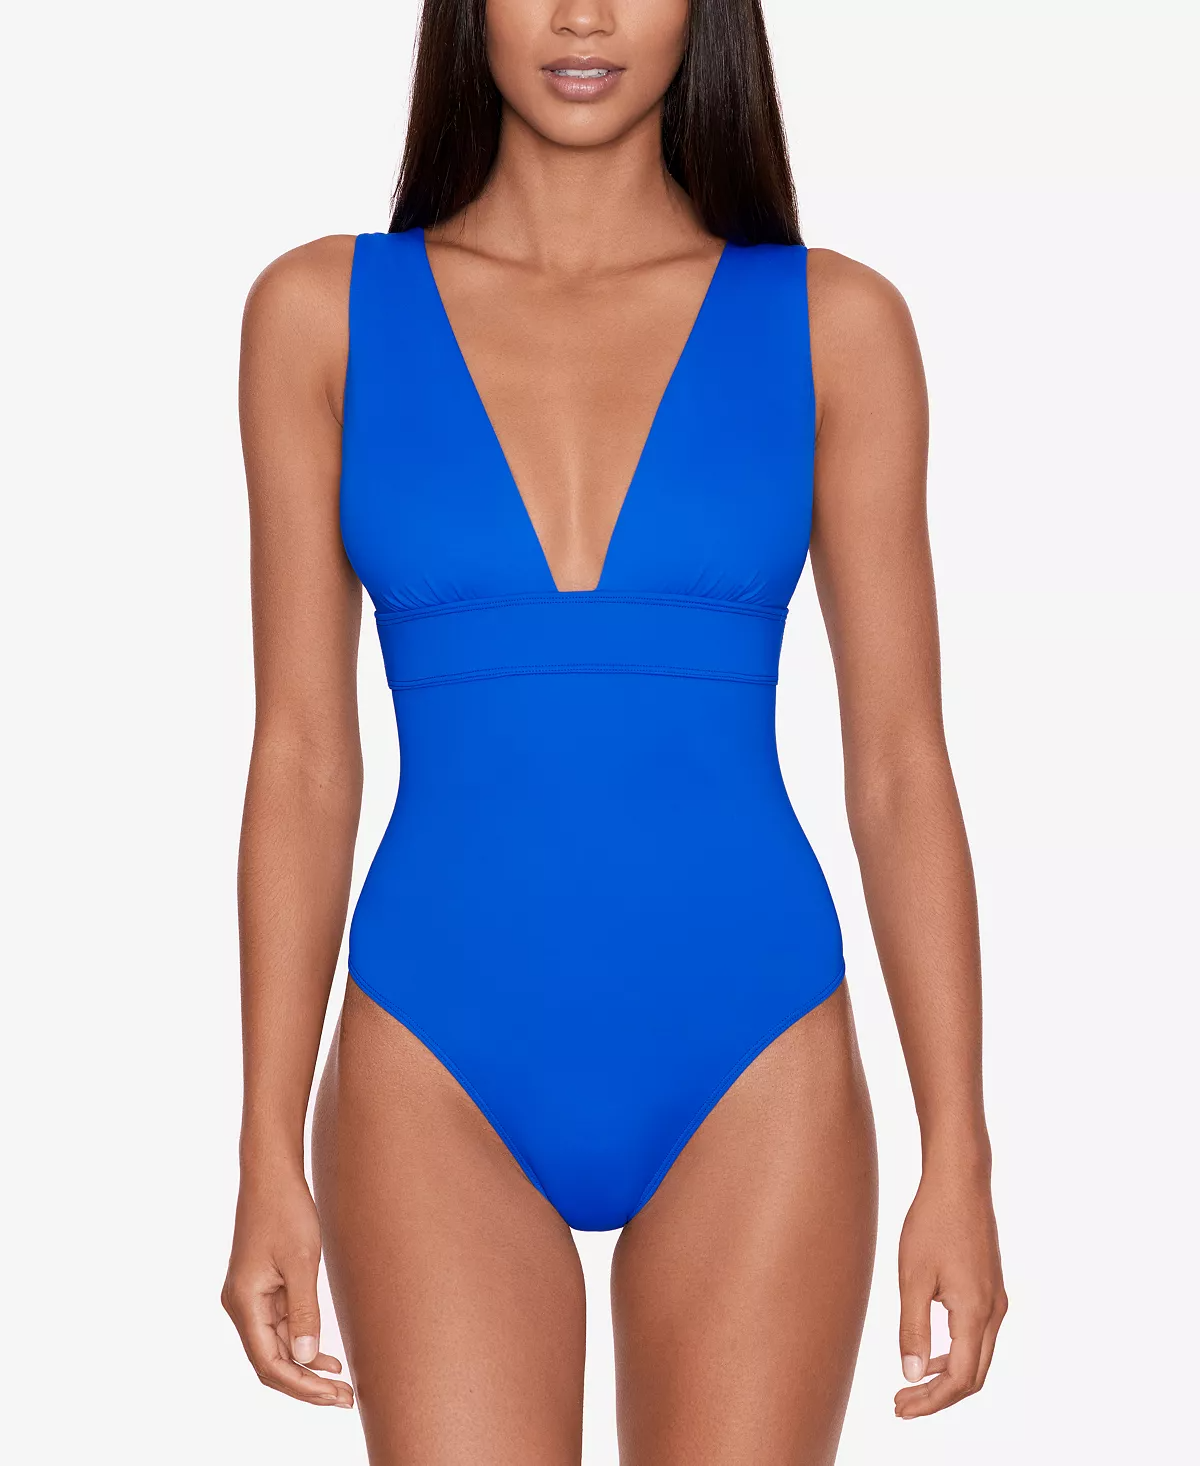 Oval Body Type V Neck or Plunging Neck Swimsuit